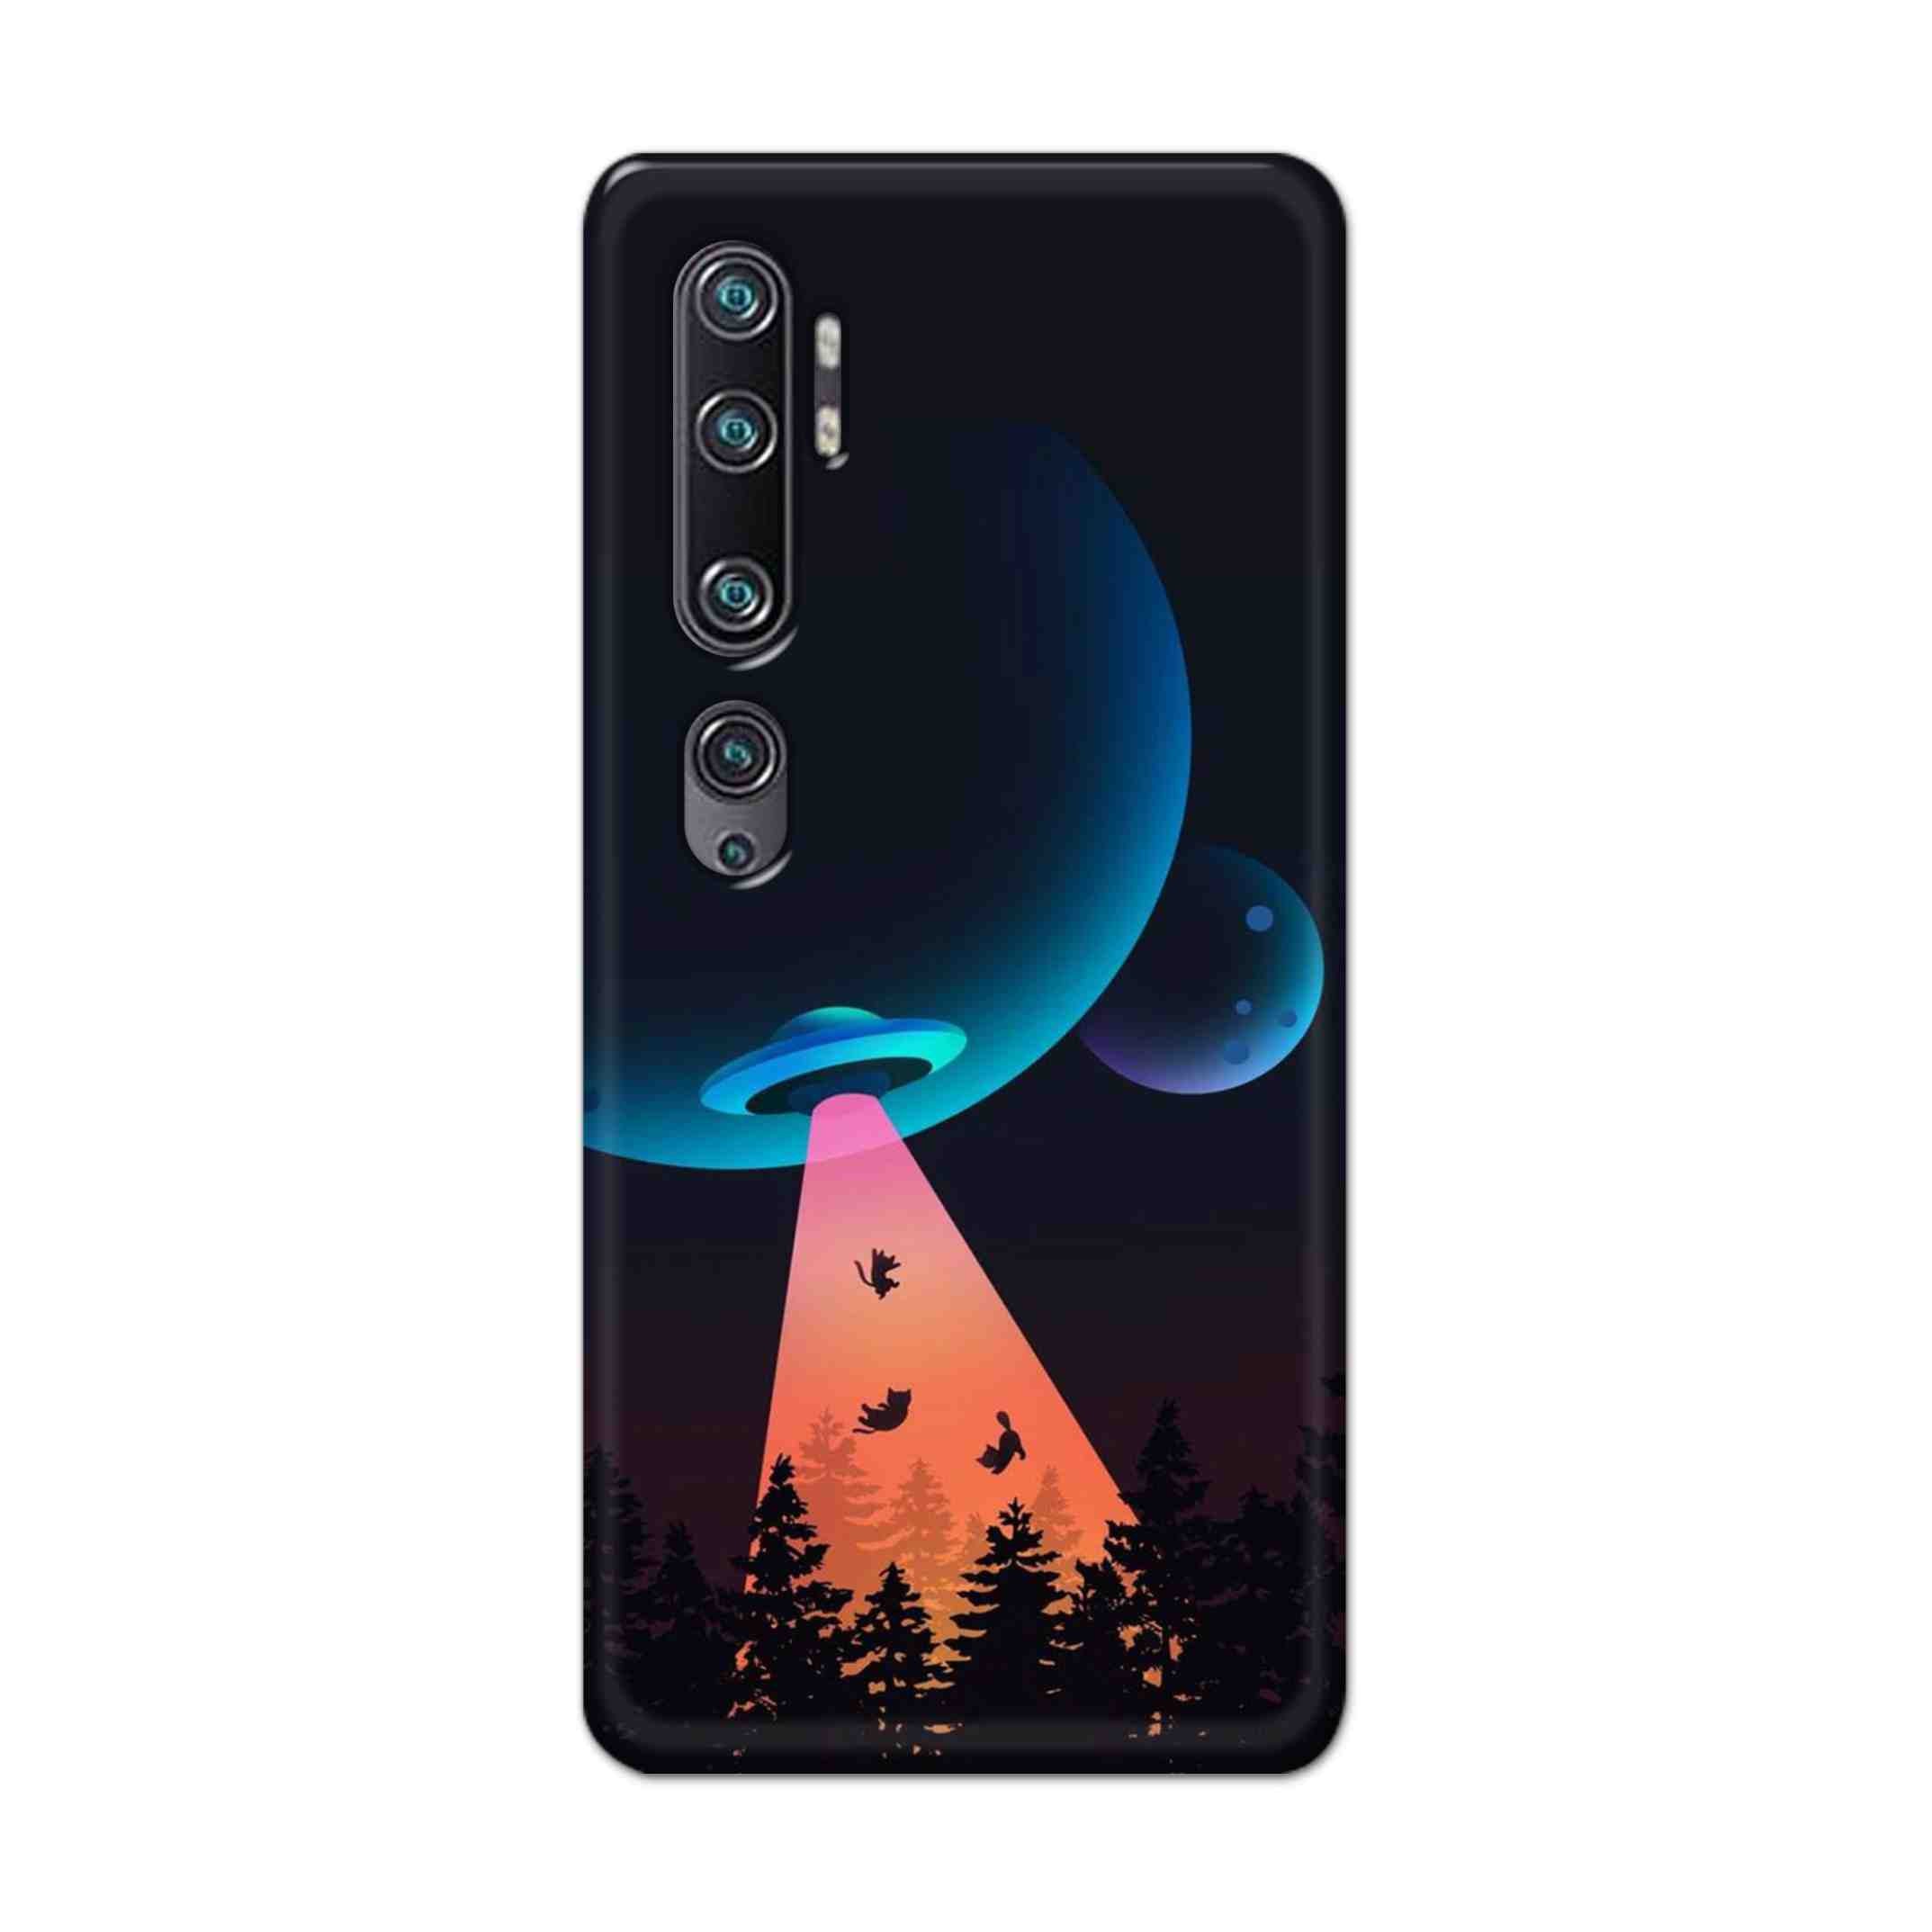 Buy Spaceship Hard Back Mobile Phone Case Cover For Xiaomi Mi Note 10 Online